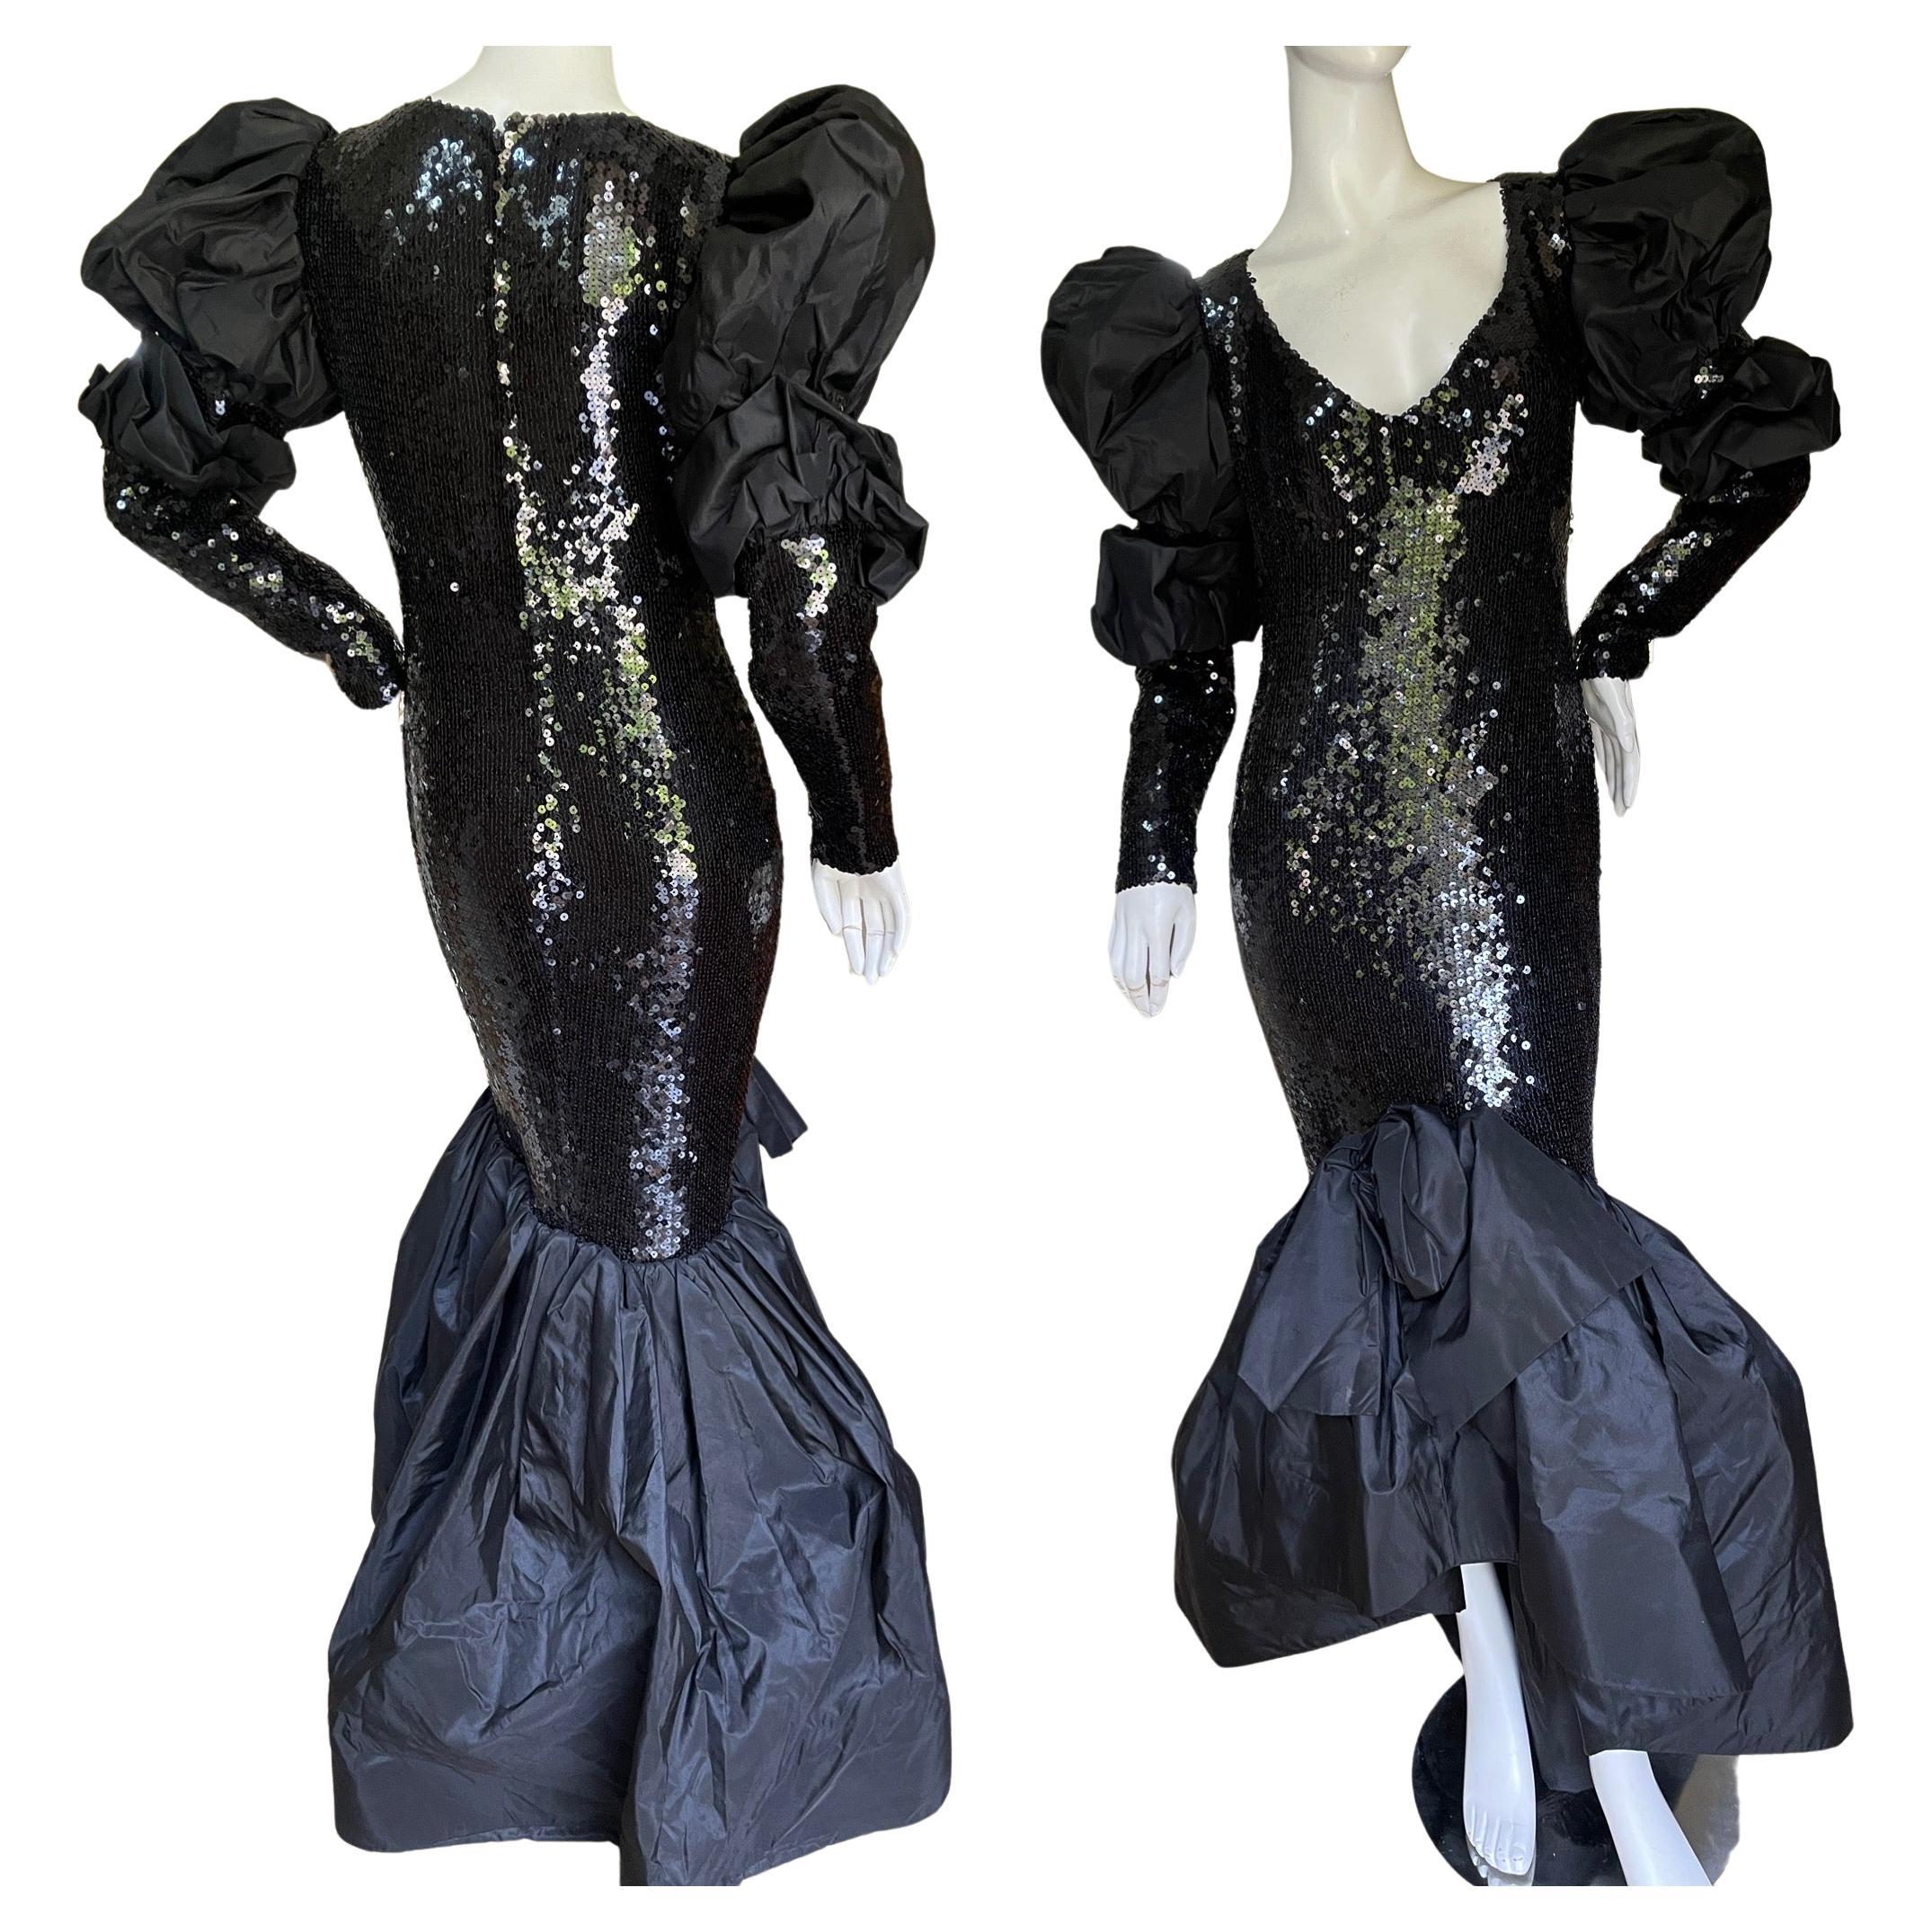 Loris Azzaro Couture Outstanding 1980's Black Sequin Mermaid Dress For Sale